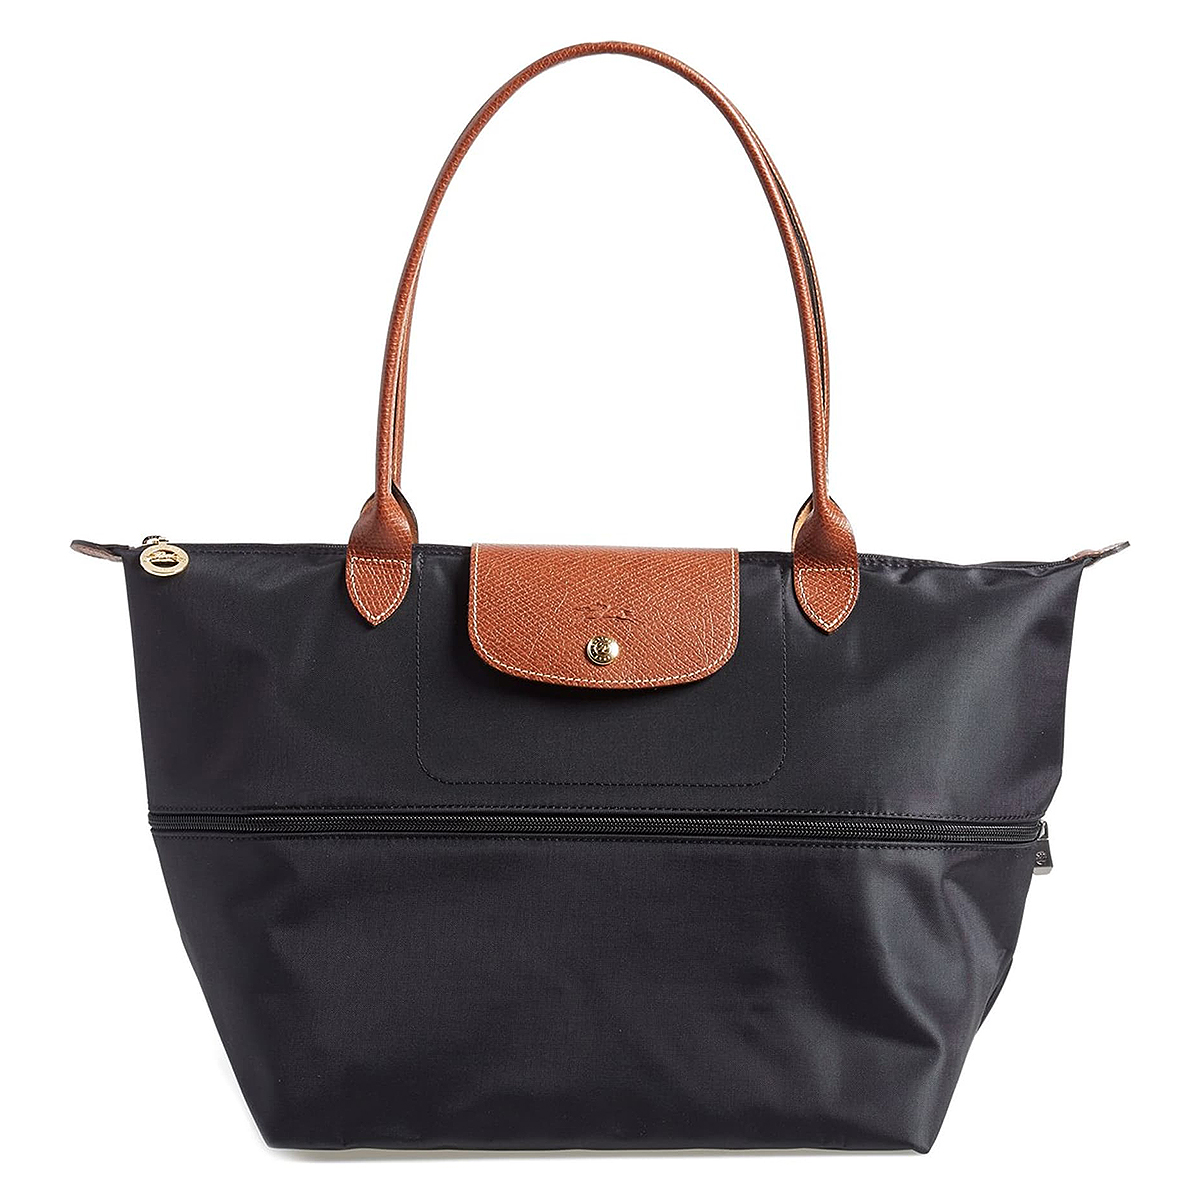 Longchamp Expandable Tote Is $75 Off in the Nordstrom Sale | Us Weekly